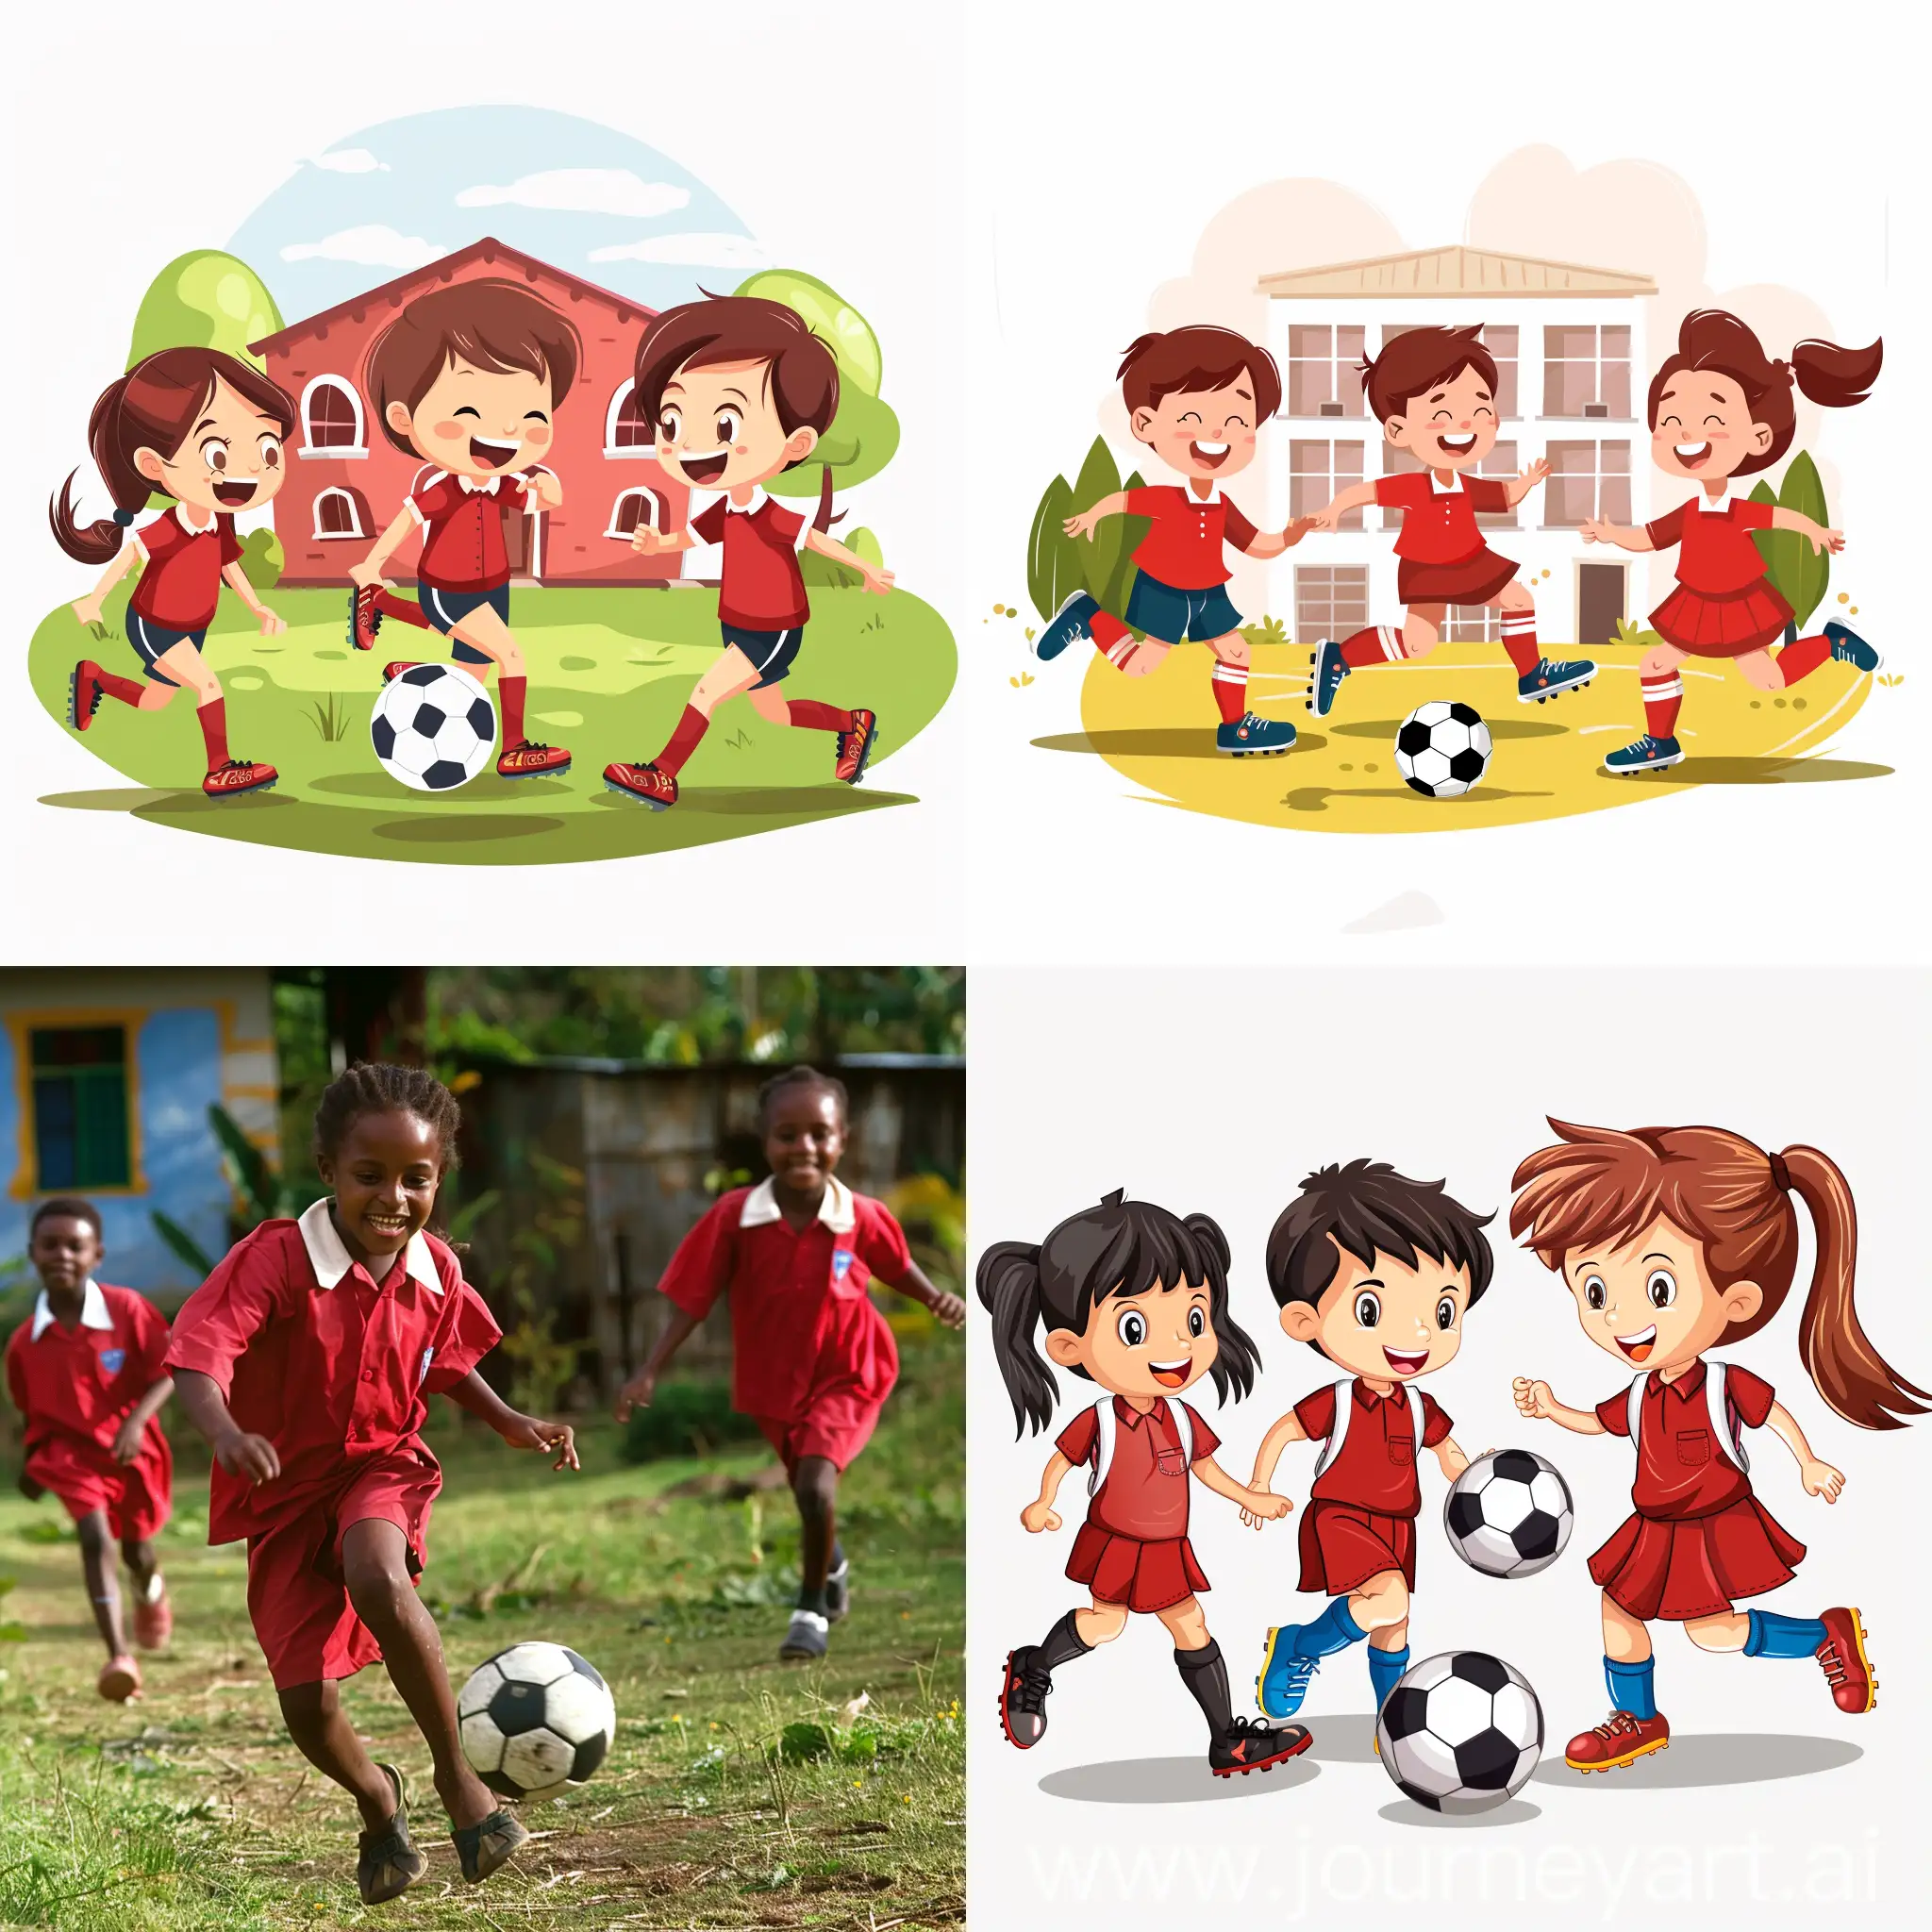 Kids playing football at the school wearing a red uniform